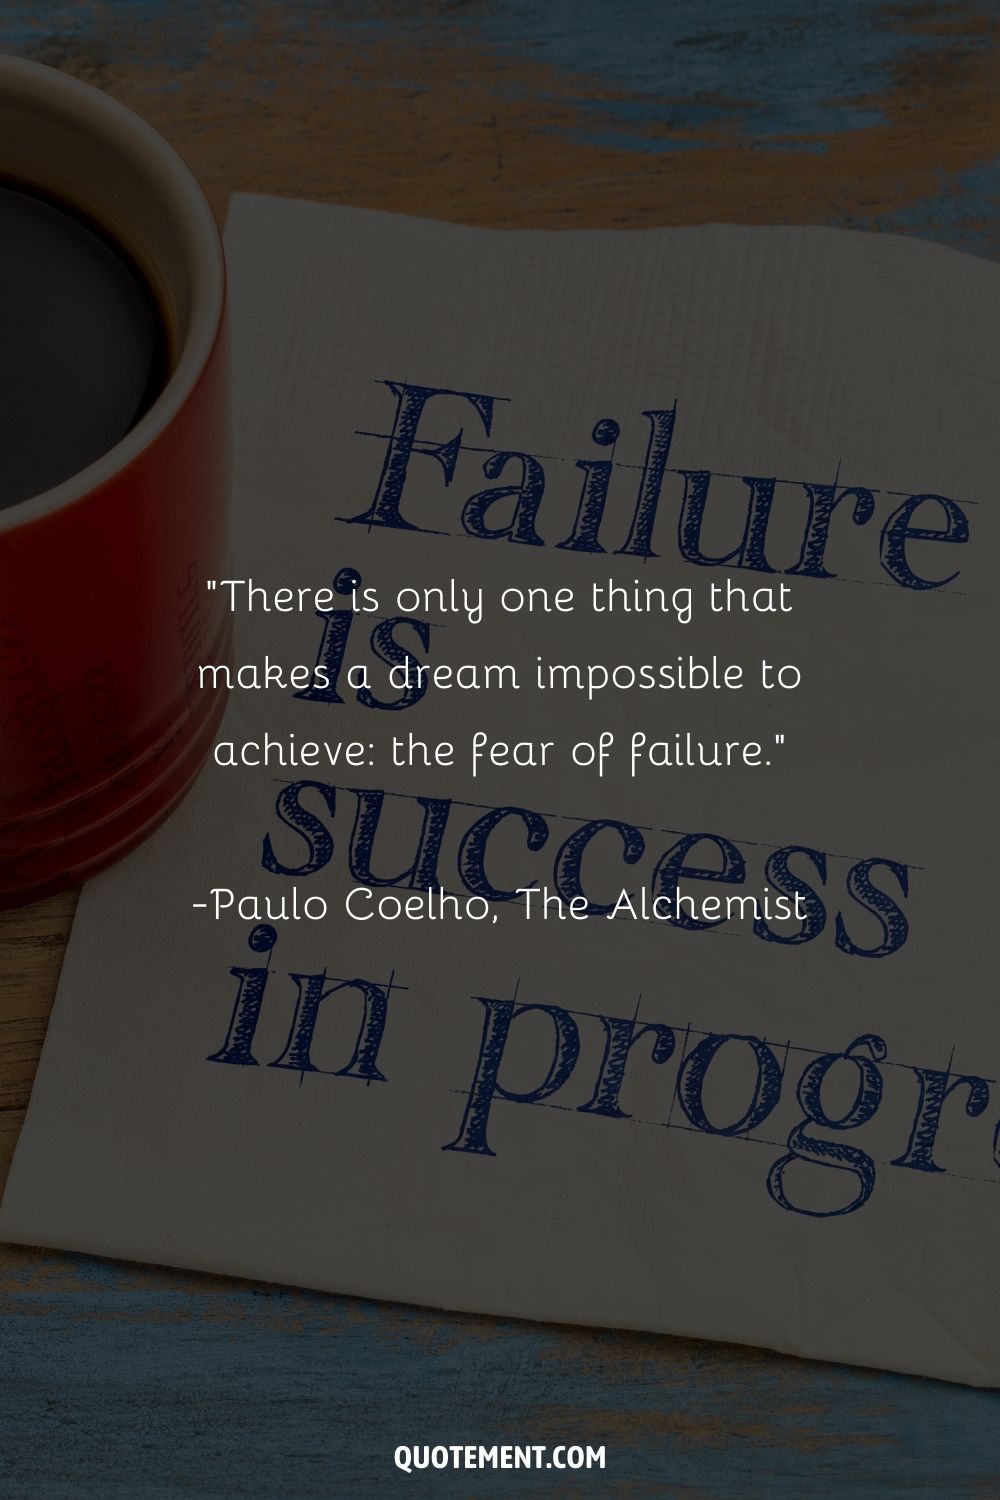 “There is only one thing that makes a dream impossible to achieve the fear of failure.” ― Paulo Coelho, The Alchemist